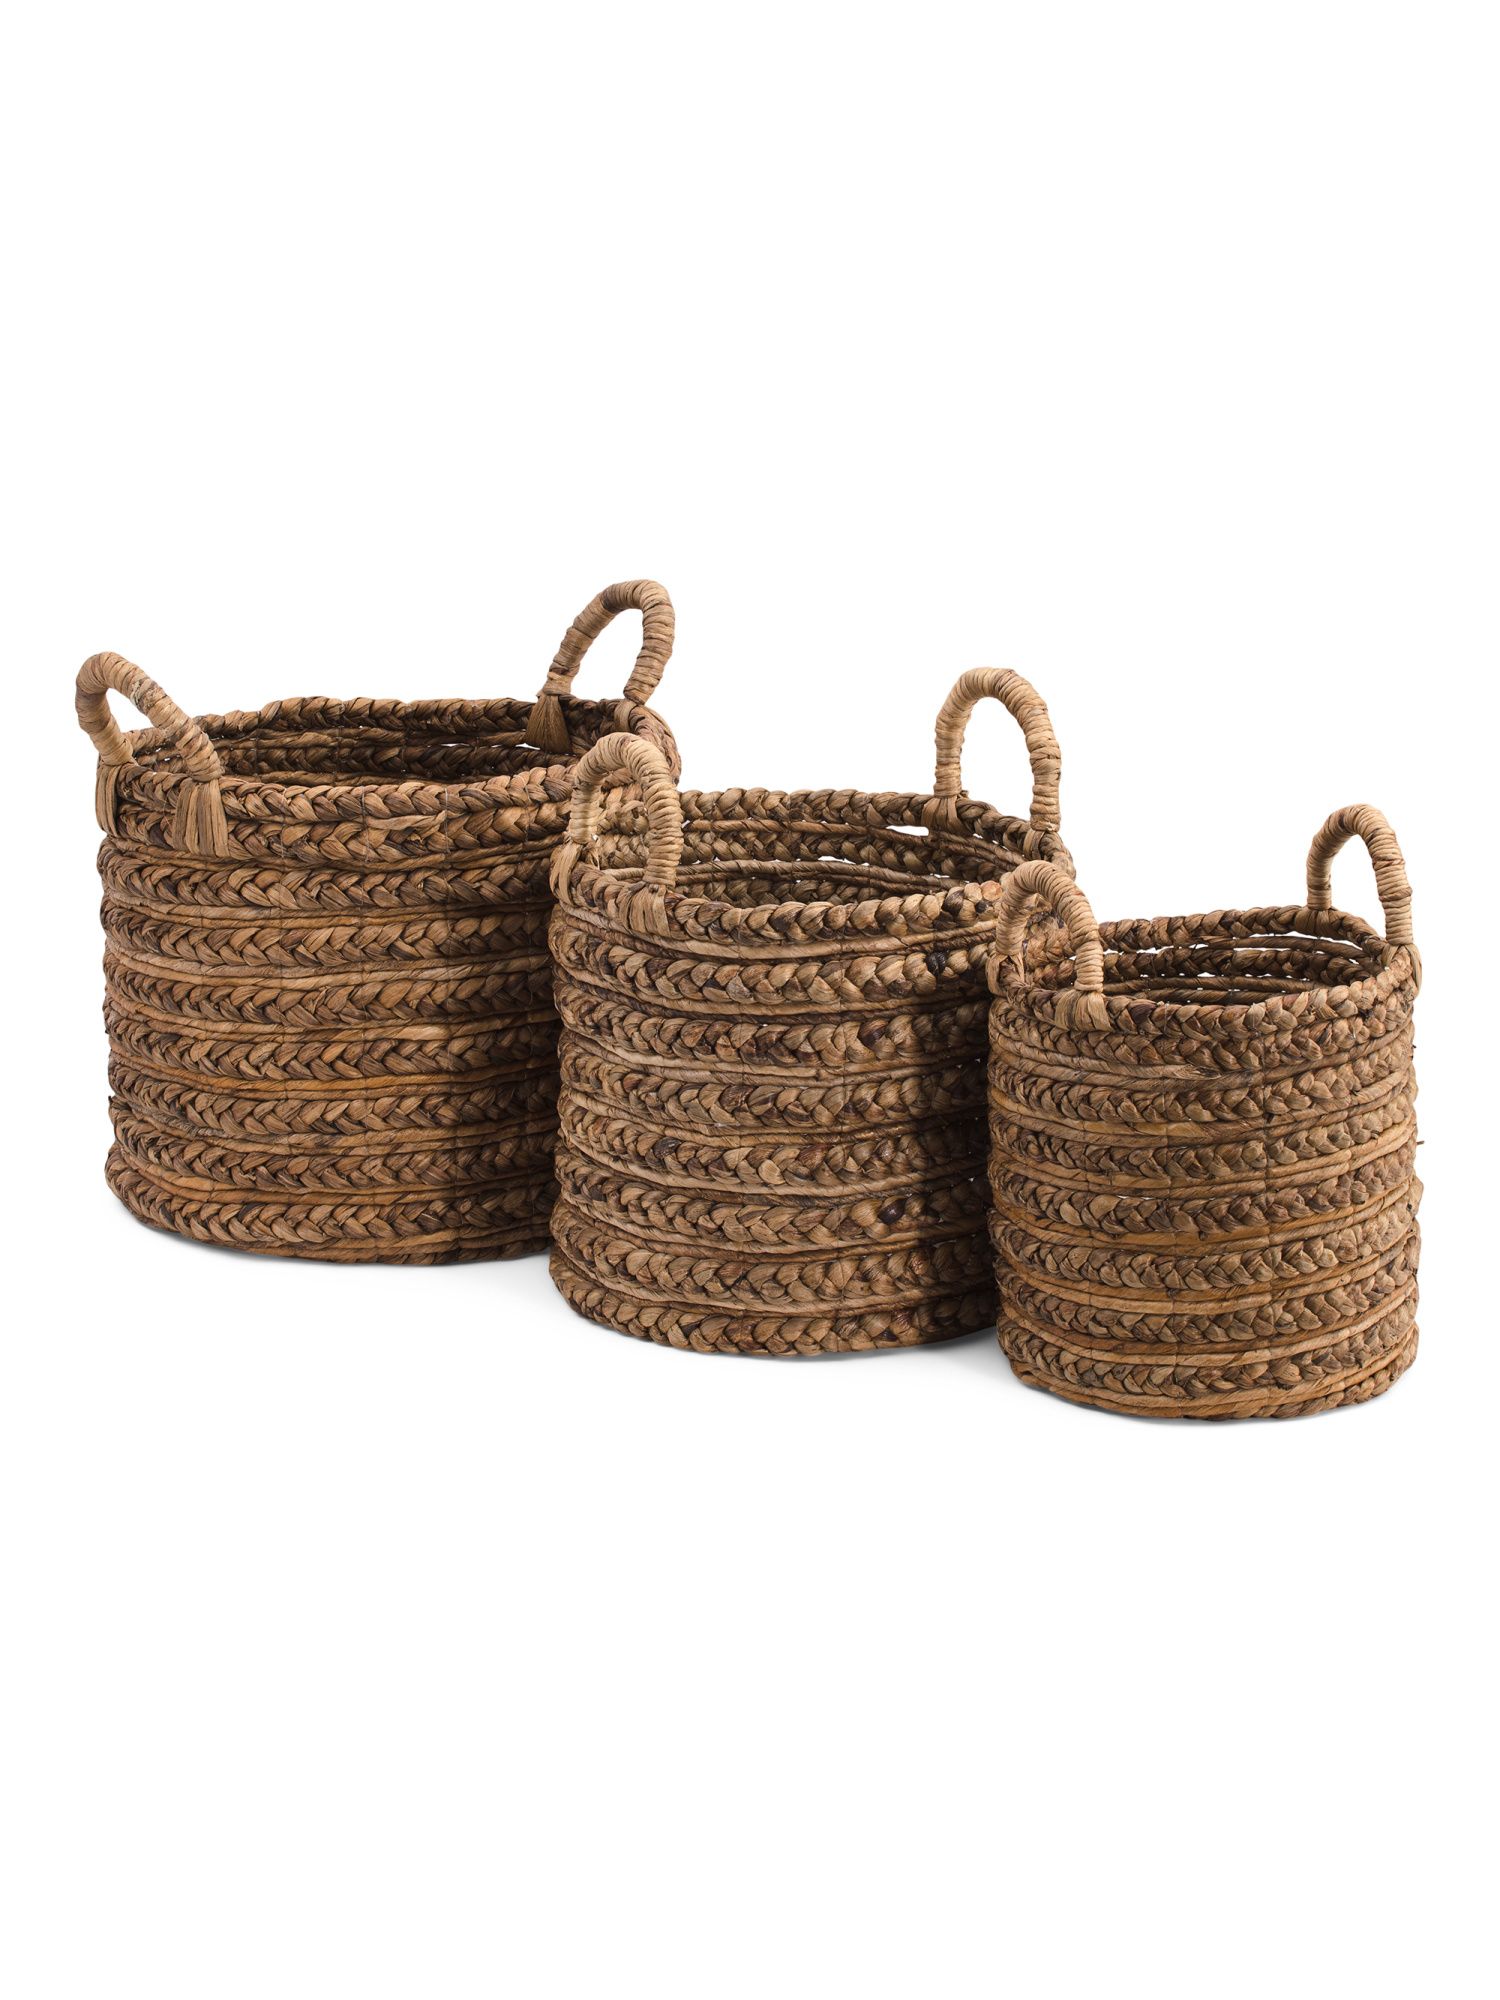 Braided Water Basket Collection | TJ Maxx